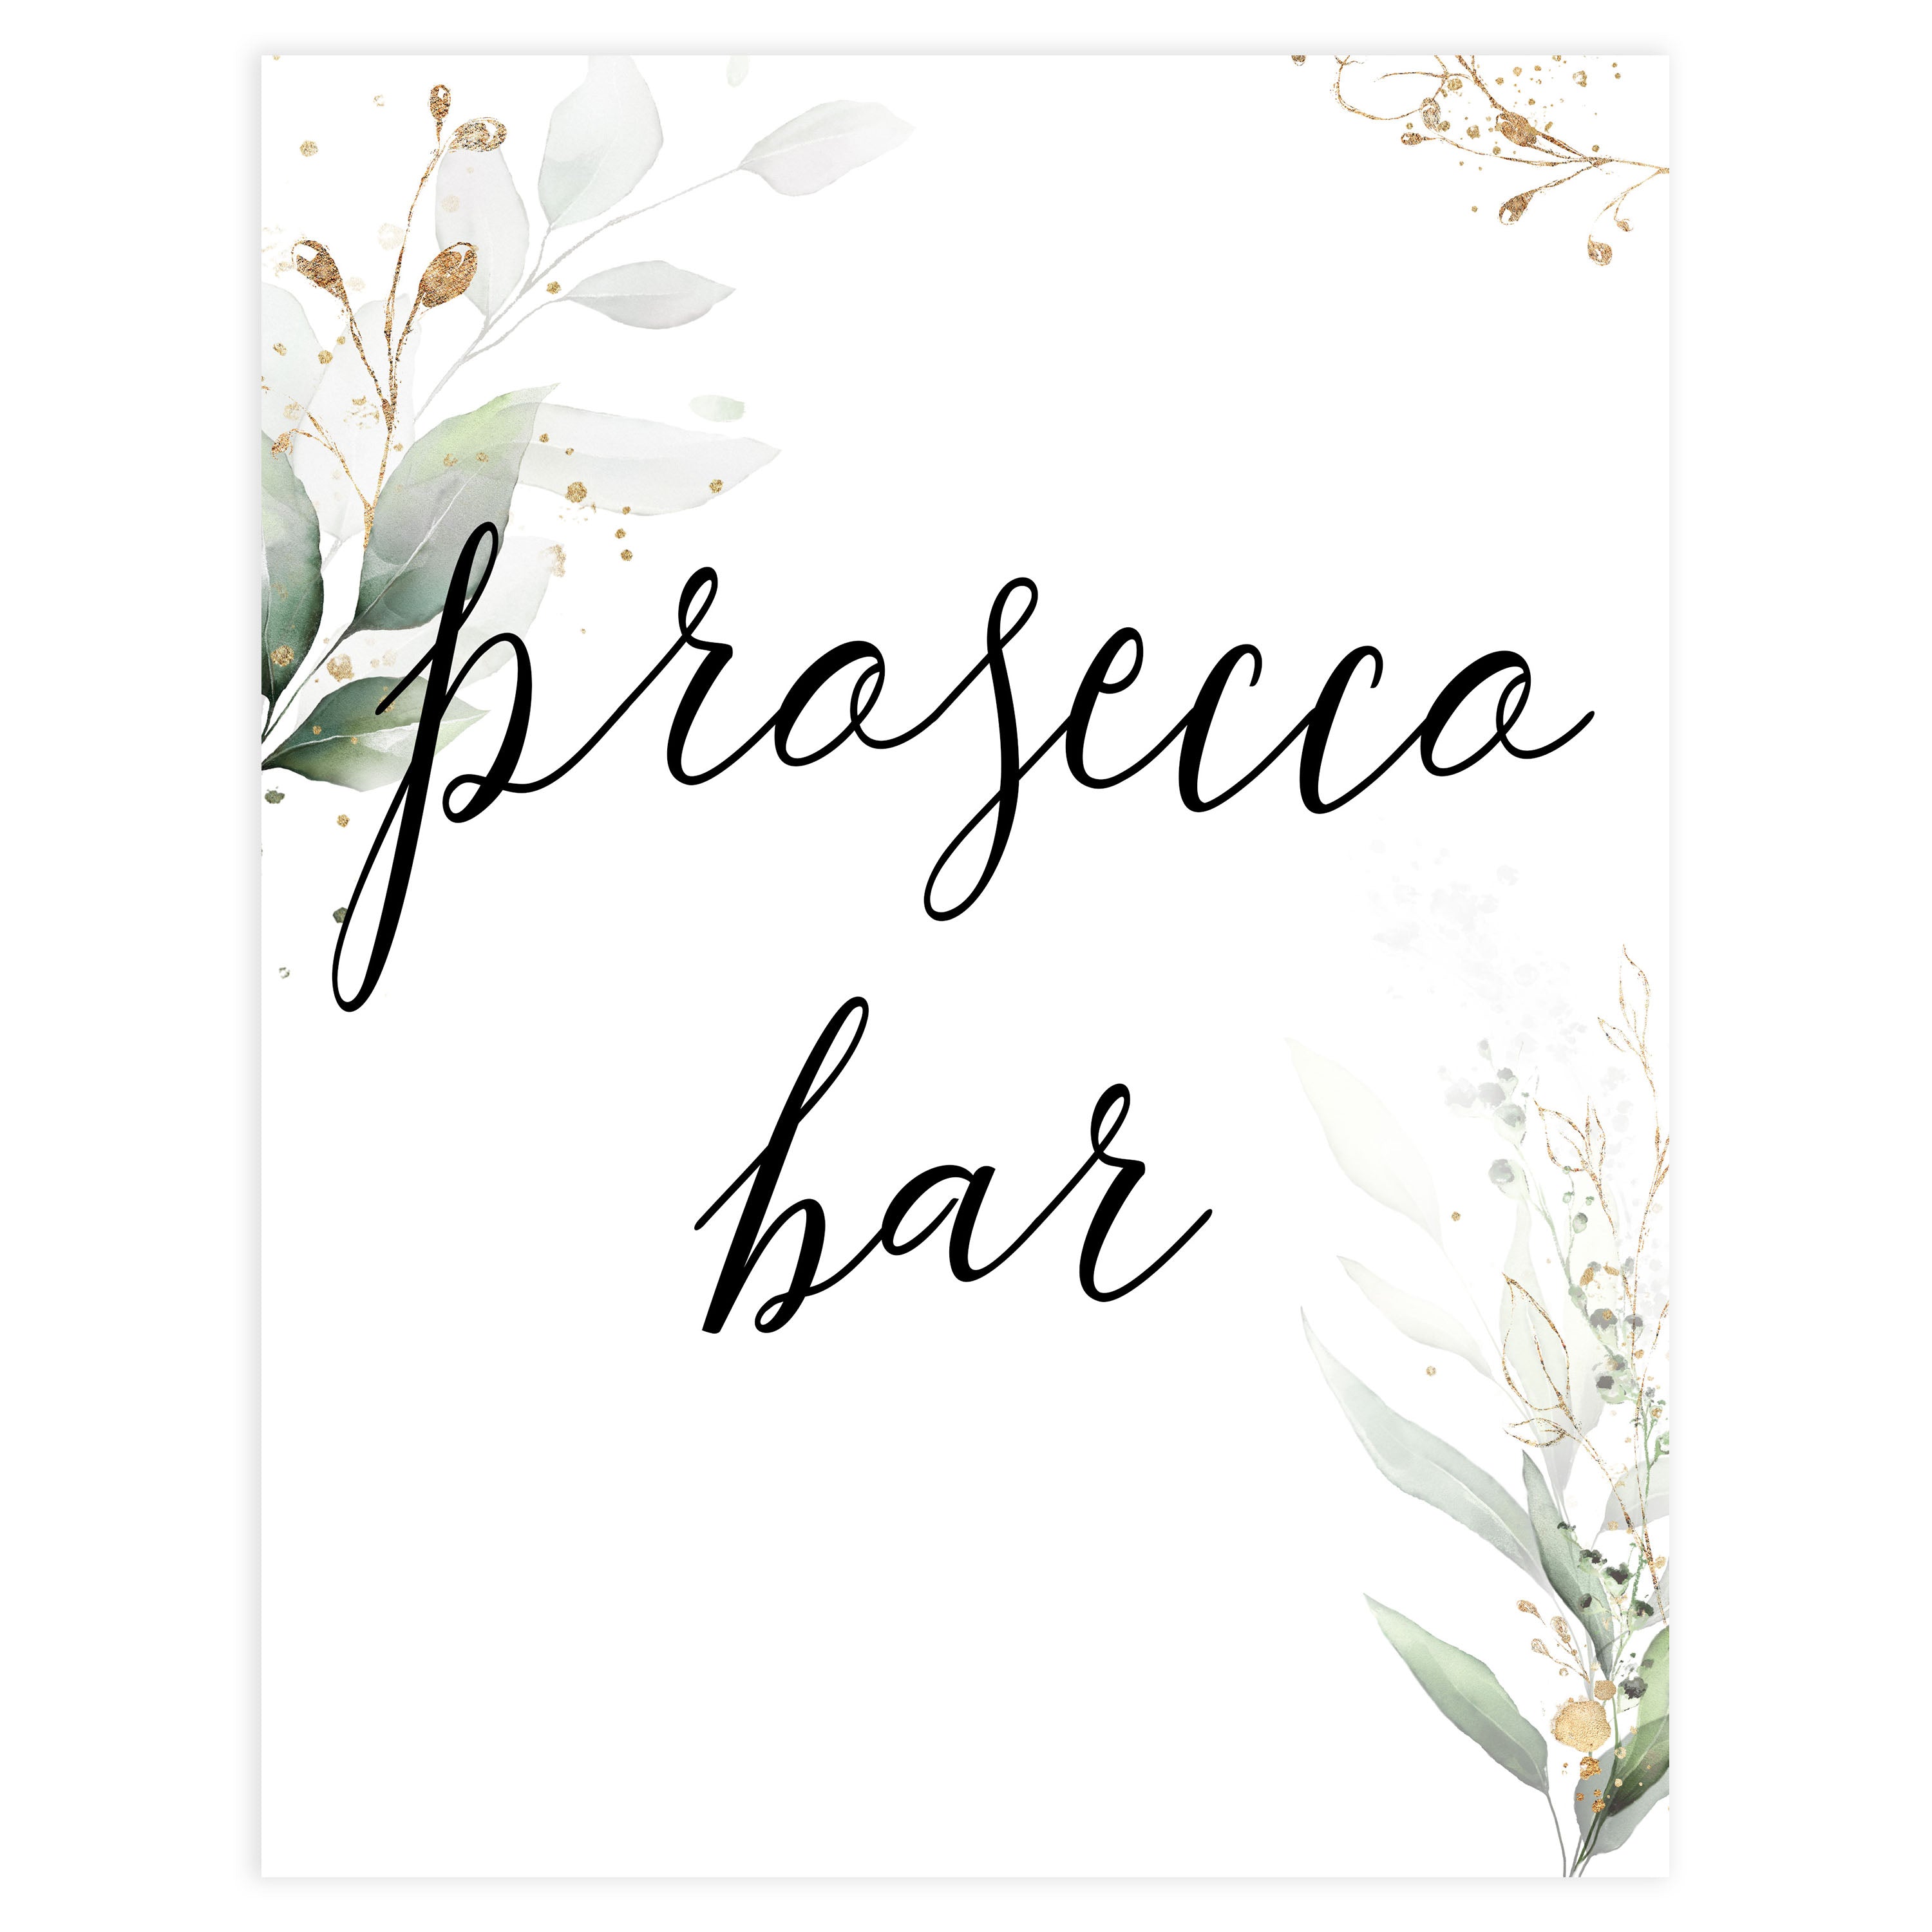 prosecco sign, Printable bridal shower signs, greenery bridal shower decor, gold leaf bridal shower decor ideas, fun bridal shower decor, bridal shower game ideas, greenery bridal shower ideas